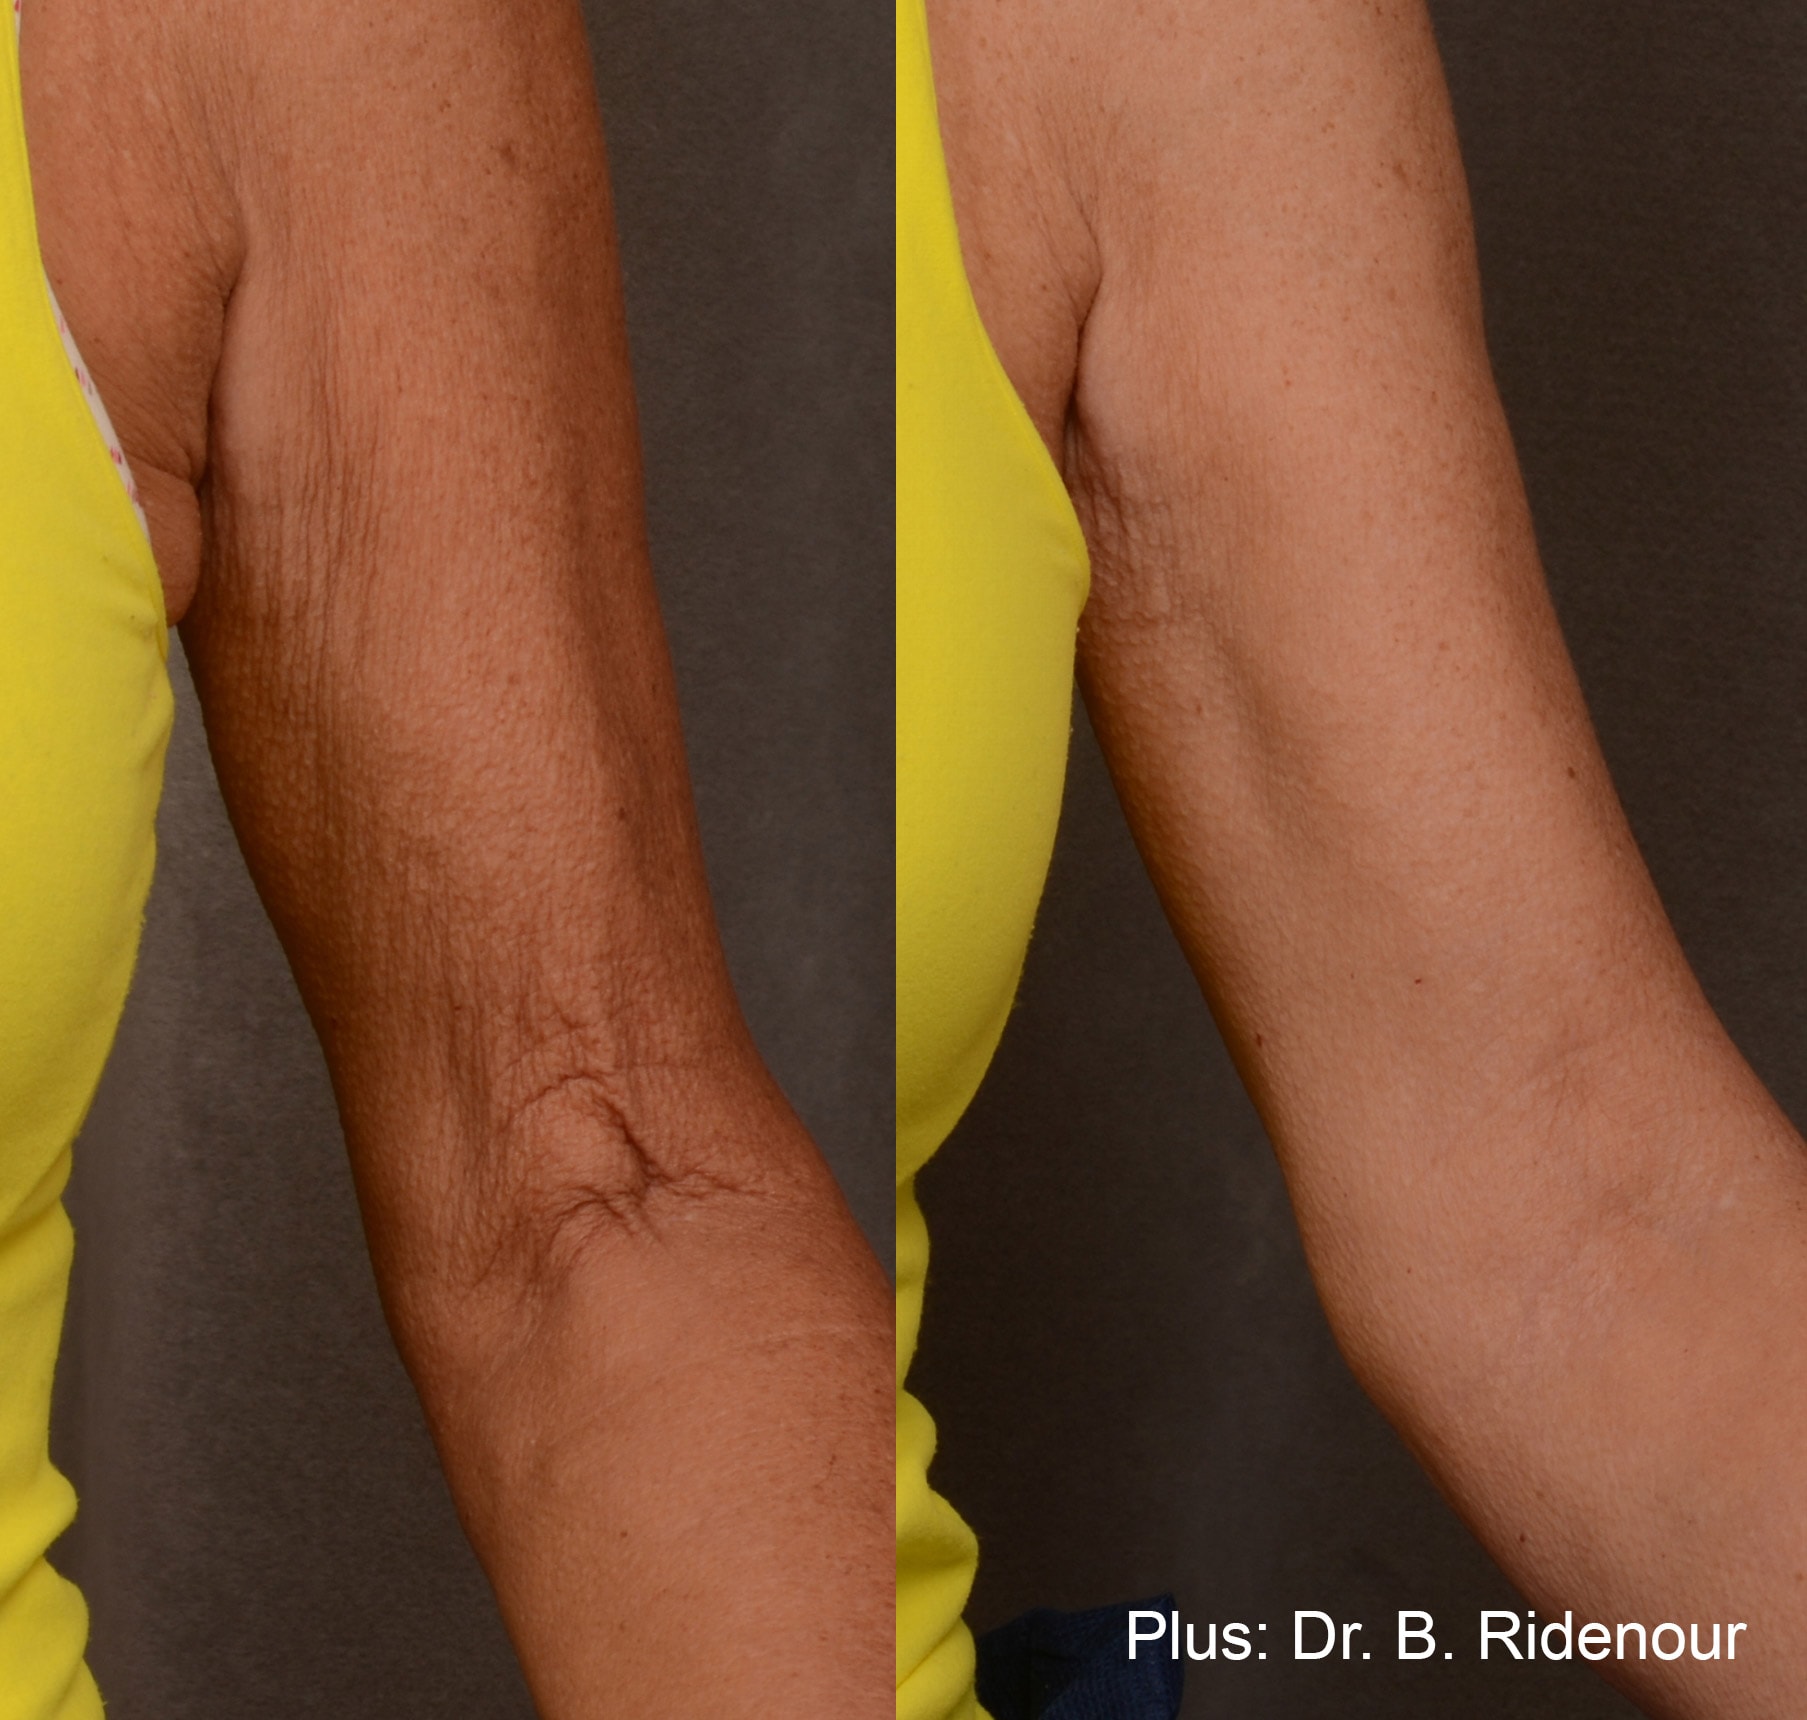 Before and After photos of Forma Plus treatments removing wrinkles and tightening loose skin on a woman’s arms